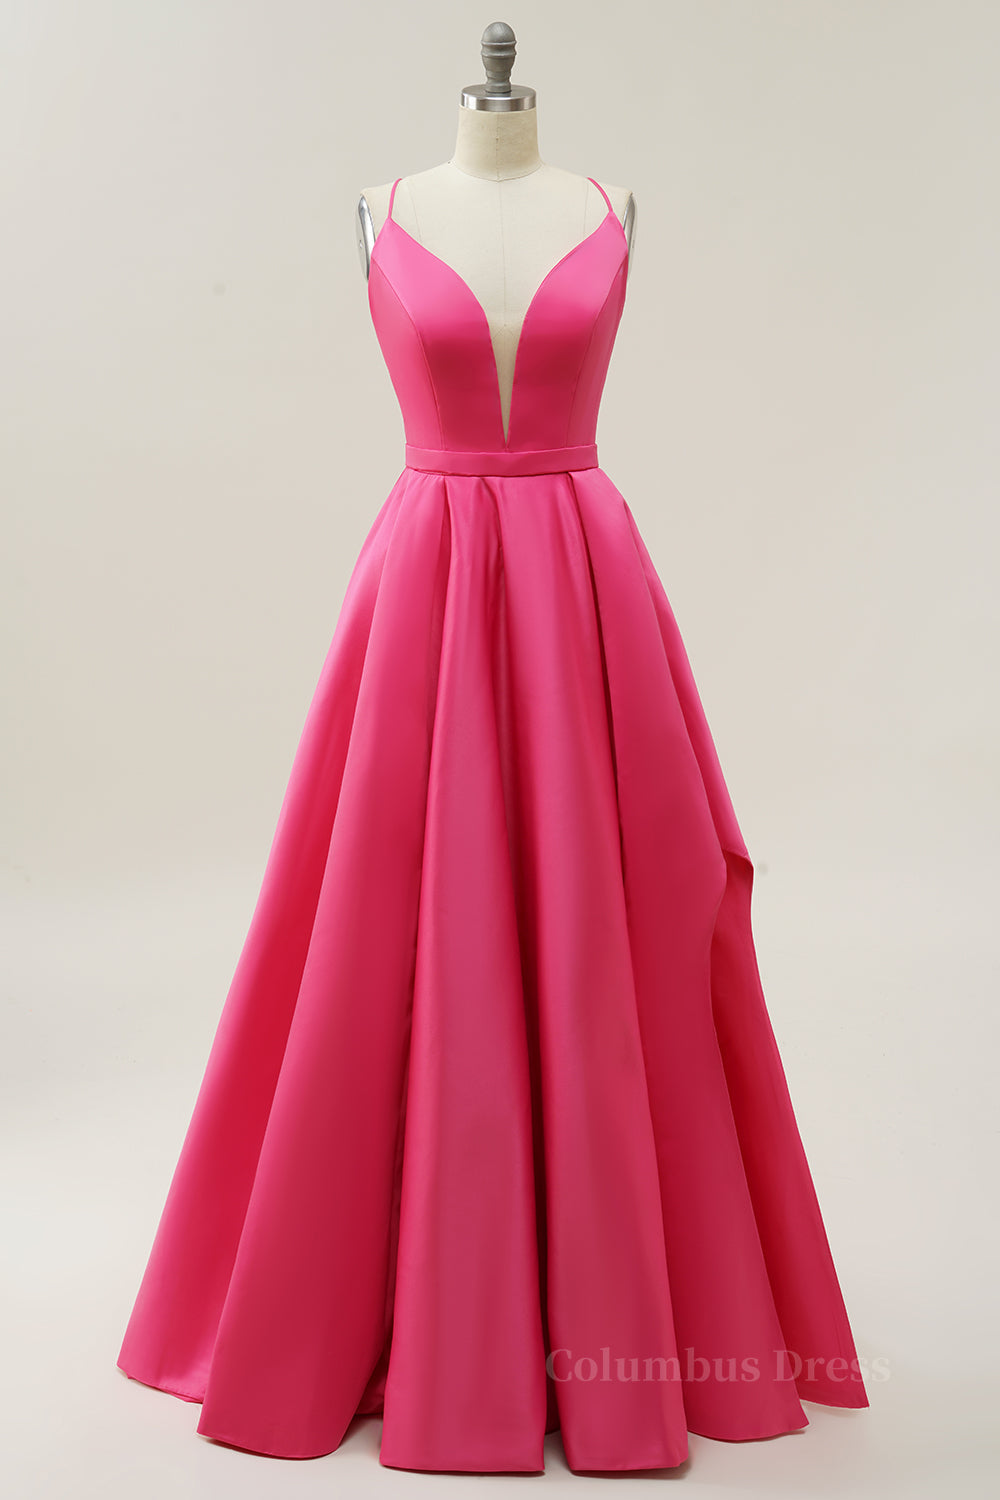 Party Dresses Fall, Simply Hot Pink A-line Straps Long Gown